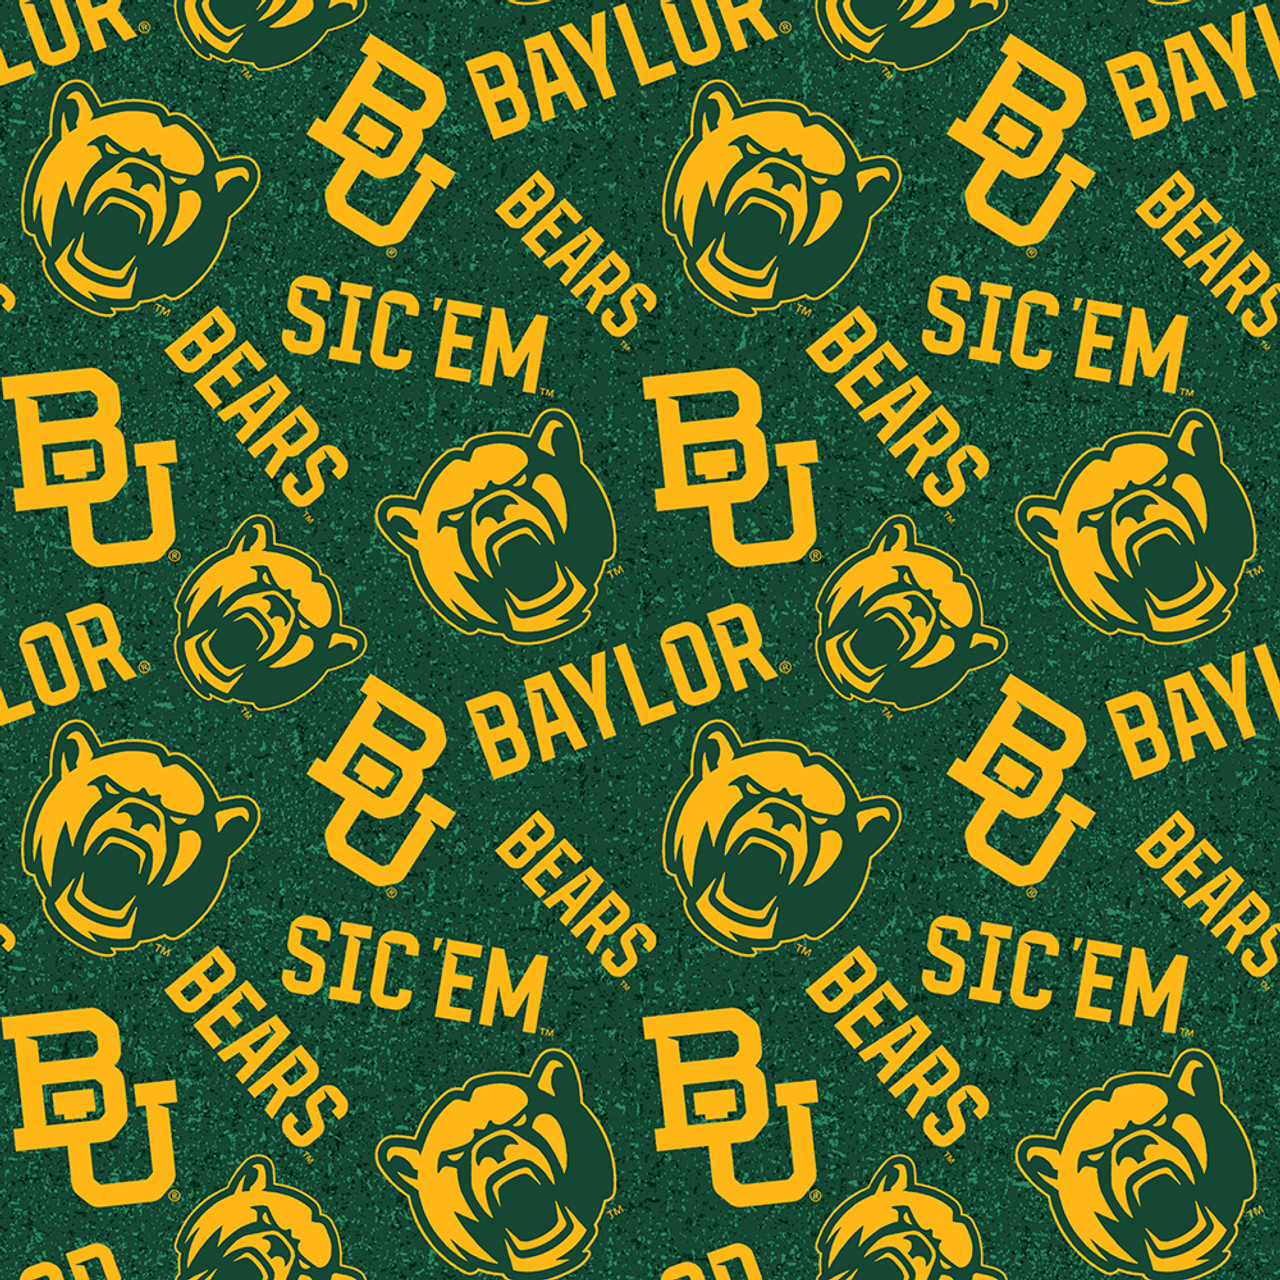 Baylor University Bears Cotton Fabric with Tone On Tone Print and Matching Solid Cotton Fabrics